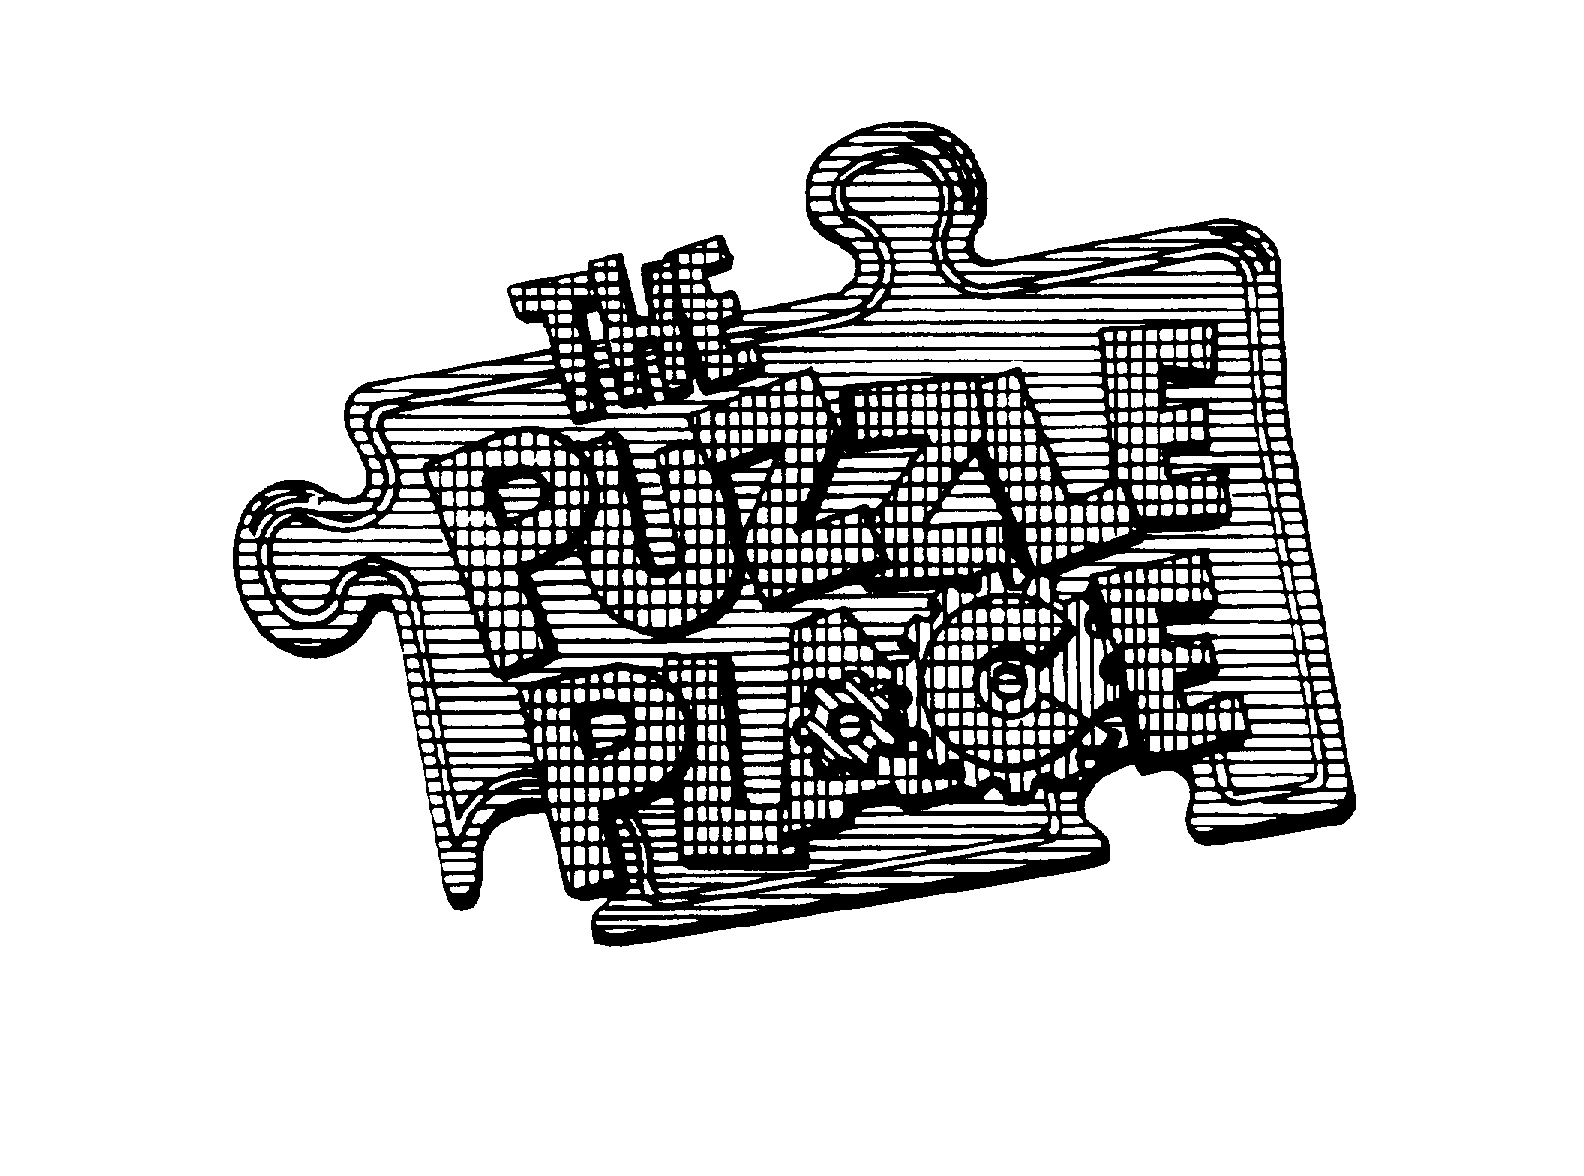 Trademark Logo THE PUZZLE PLACE